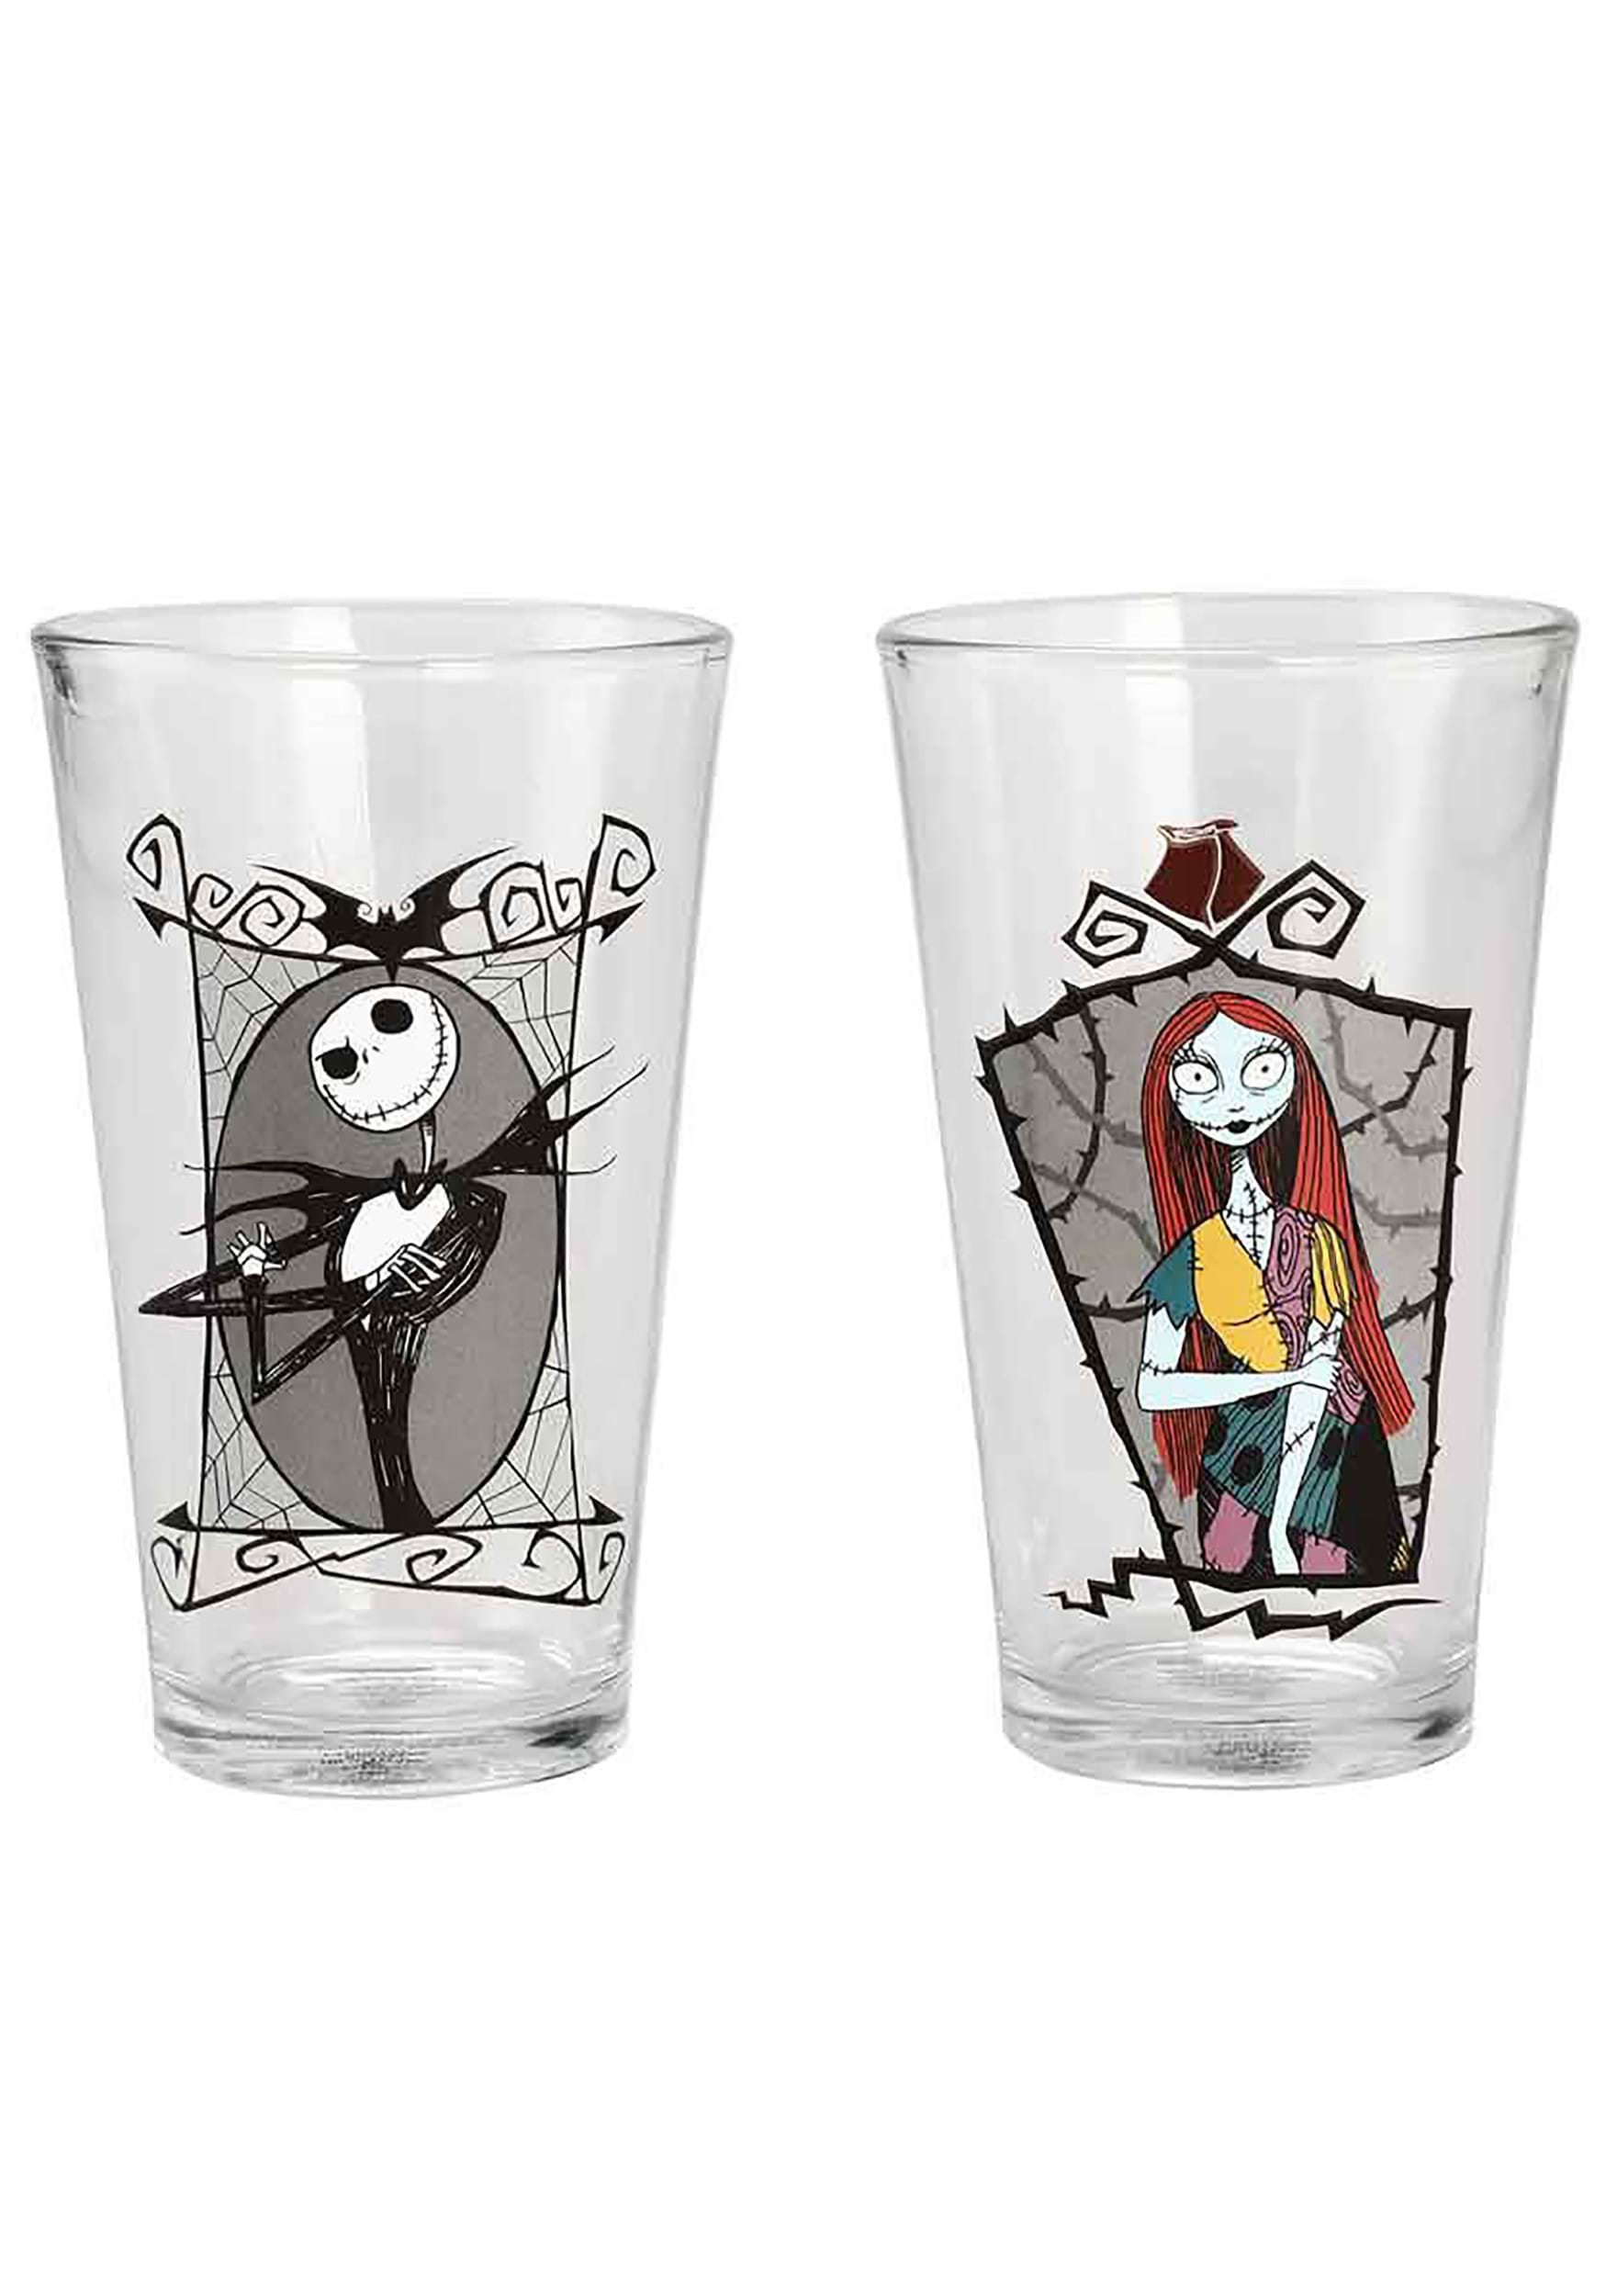 https://images.fun.com/products/79291/1-1/nightmare-before-christmas-jack-sally-2-pc-16-oz-glass-set.jpg